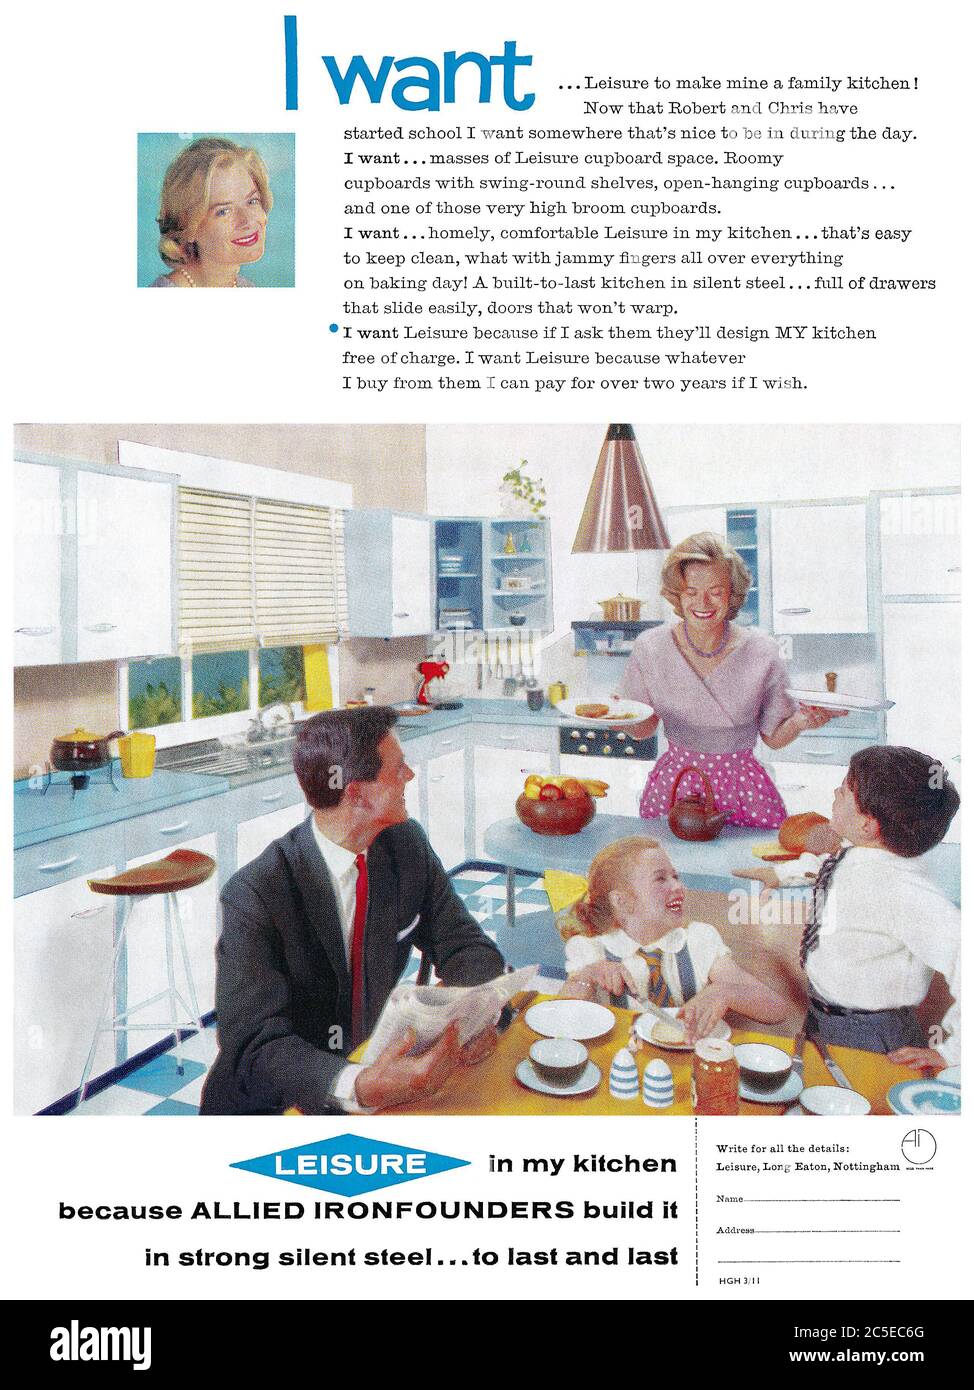 1960 British advertisement for Allied Ironfounders fitted kitchens. Stock Photo